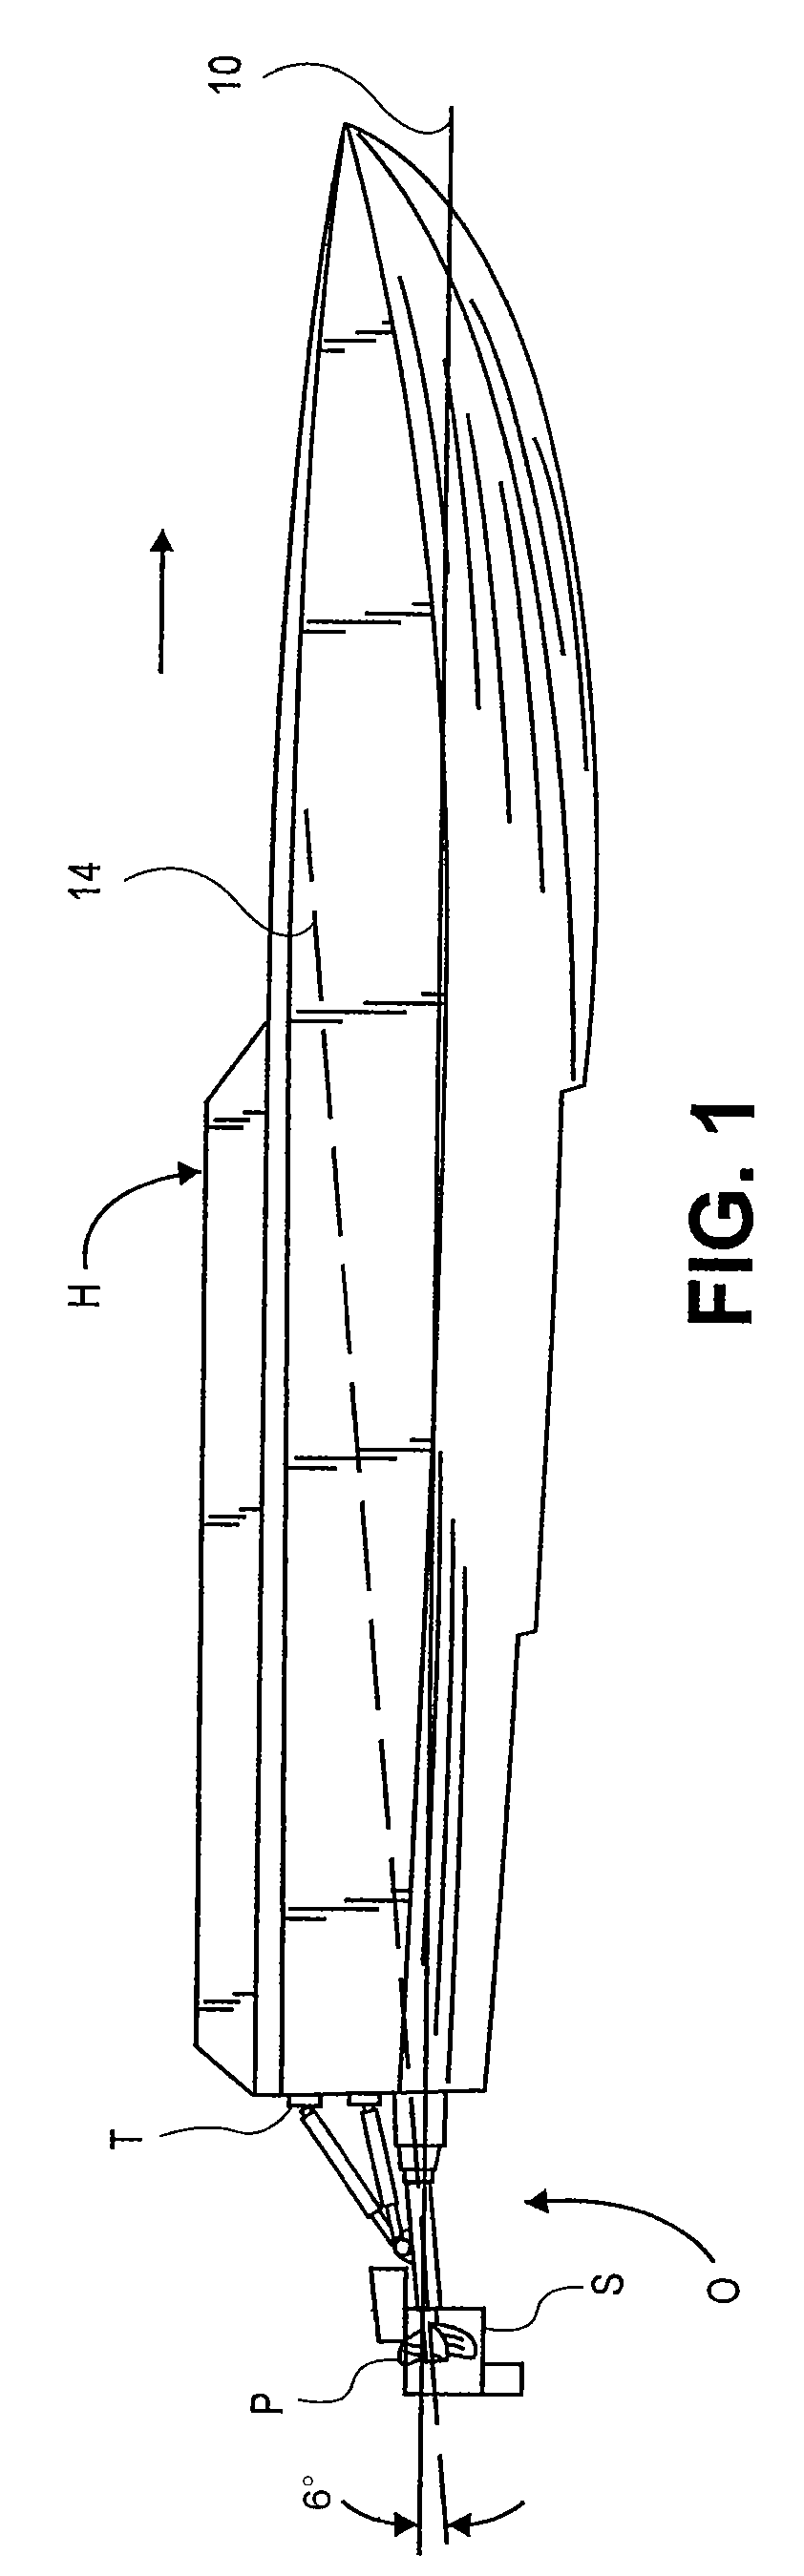 Shroud enclosed inverted surface piercing propeller outdrive